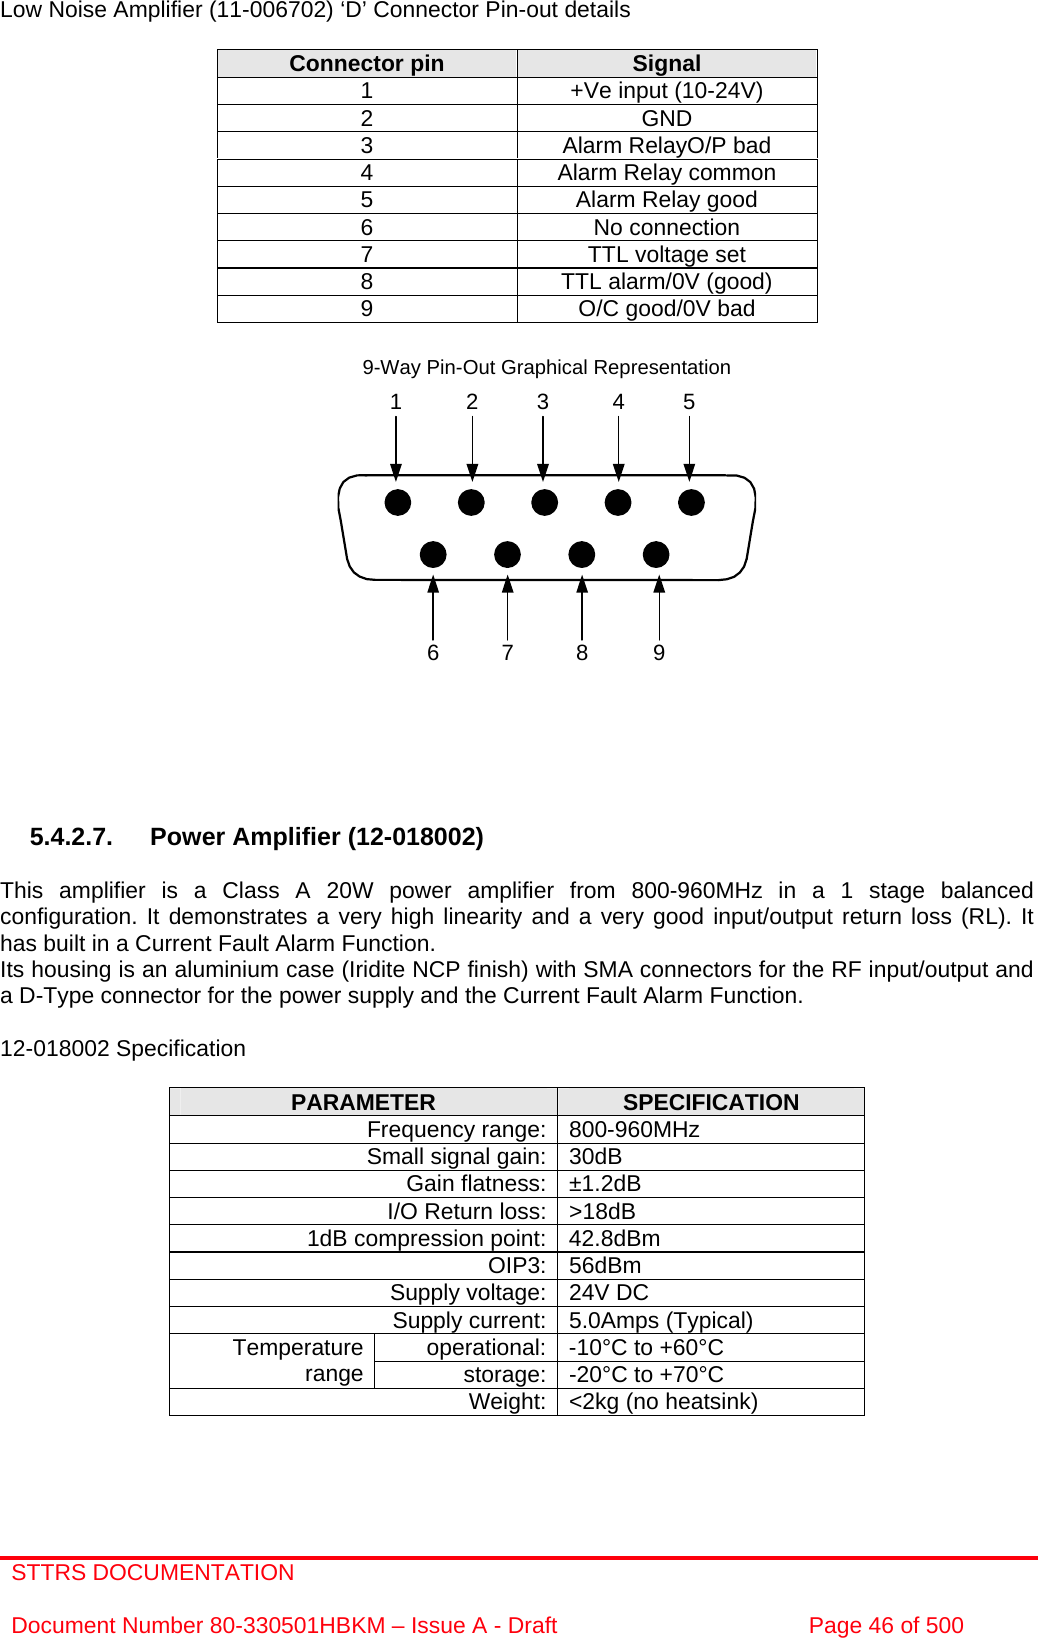 STTRS DOCUMENTATION  Document Number 80-330501HBKM – Issue A - Draft  Page 46 of 500  7 8 961 2 3 4 59-Way Pin-Out Graphical Representation Low Noise Amplifier (11-006702) ‘D’ Connector Pin-out details  Connector pin  Signal 1  +Ve input (10-24V) 2 GND 3  Alarm RelayO/P bad 4  Alarm Relay common 5  Alarm Relay good 6 No connection 7  TTL voltage set 8  TTL alarm/0V (good) 9  O/C good/0V bad                    5.4.2.7.  Power Amplifier (12-018002)  This amplifier is a Class A 20W power amplifier from 800-960MHz in a 1 stage balanced configuration. It demonstrates a very high linearity and a very good input/output return loss (RL). It has built in a Current Fault Alarm Function. Its housing is an aluminium case (Iridite NCP finish) with SMA connectors for the RF input/output and a D-Type connector for the power supply and the Current Fault Alarm Function.  12-018002 Specification  PARAMETER  SPECIFICATION Frequency range: 800-960MHz Small signal gain: 30dB Gain flatness: ±1.2dB I/O Return loss: &gt;18dB 1dB compression point: 42.8dBm OIP3: 56dBm Supply voltage: 24V DC Supply current: 5.0Amps (Typical) operational: -10°C to +60°C Temperature range  storage: -20°C to +70°C Weight: &lt;2kg (no heatsink)  